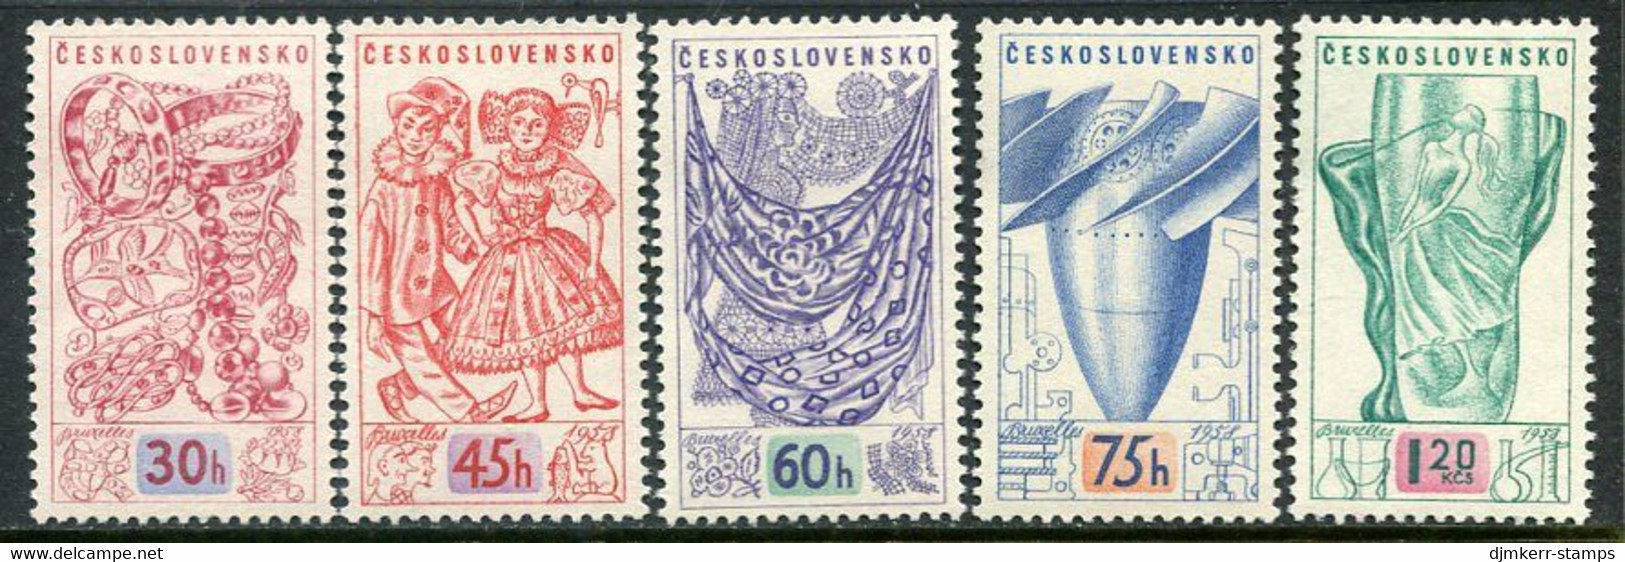 CZECHOSLOVAKIA 1958 World Expo, Brussels MNH / **   Michel 1068-72 - Unused Stamps